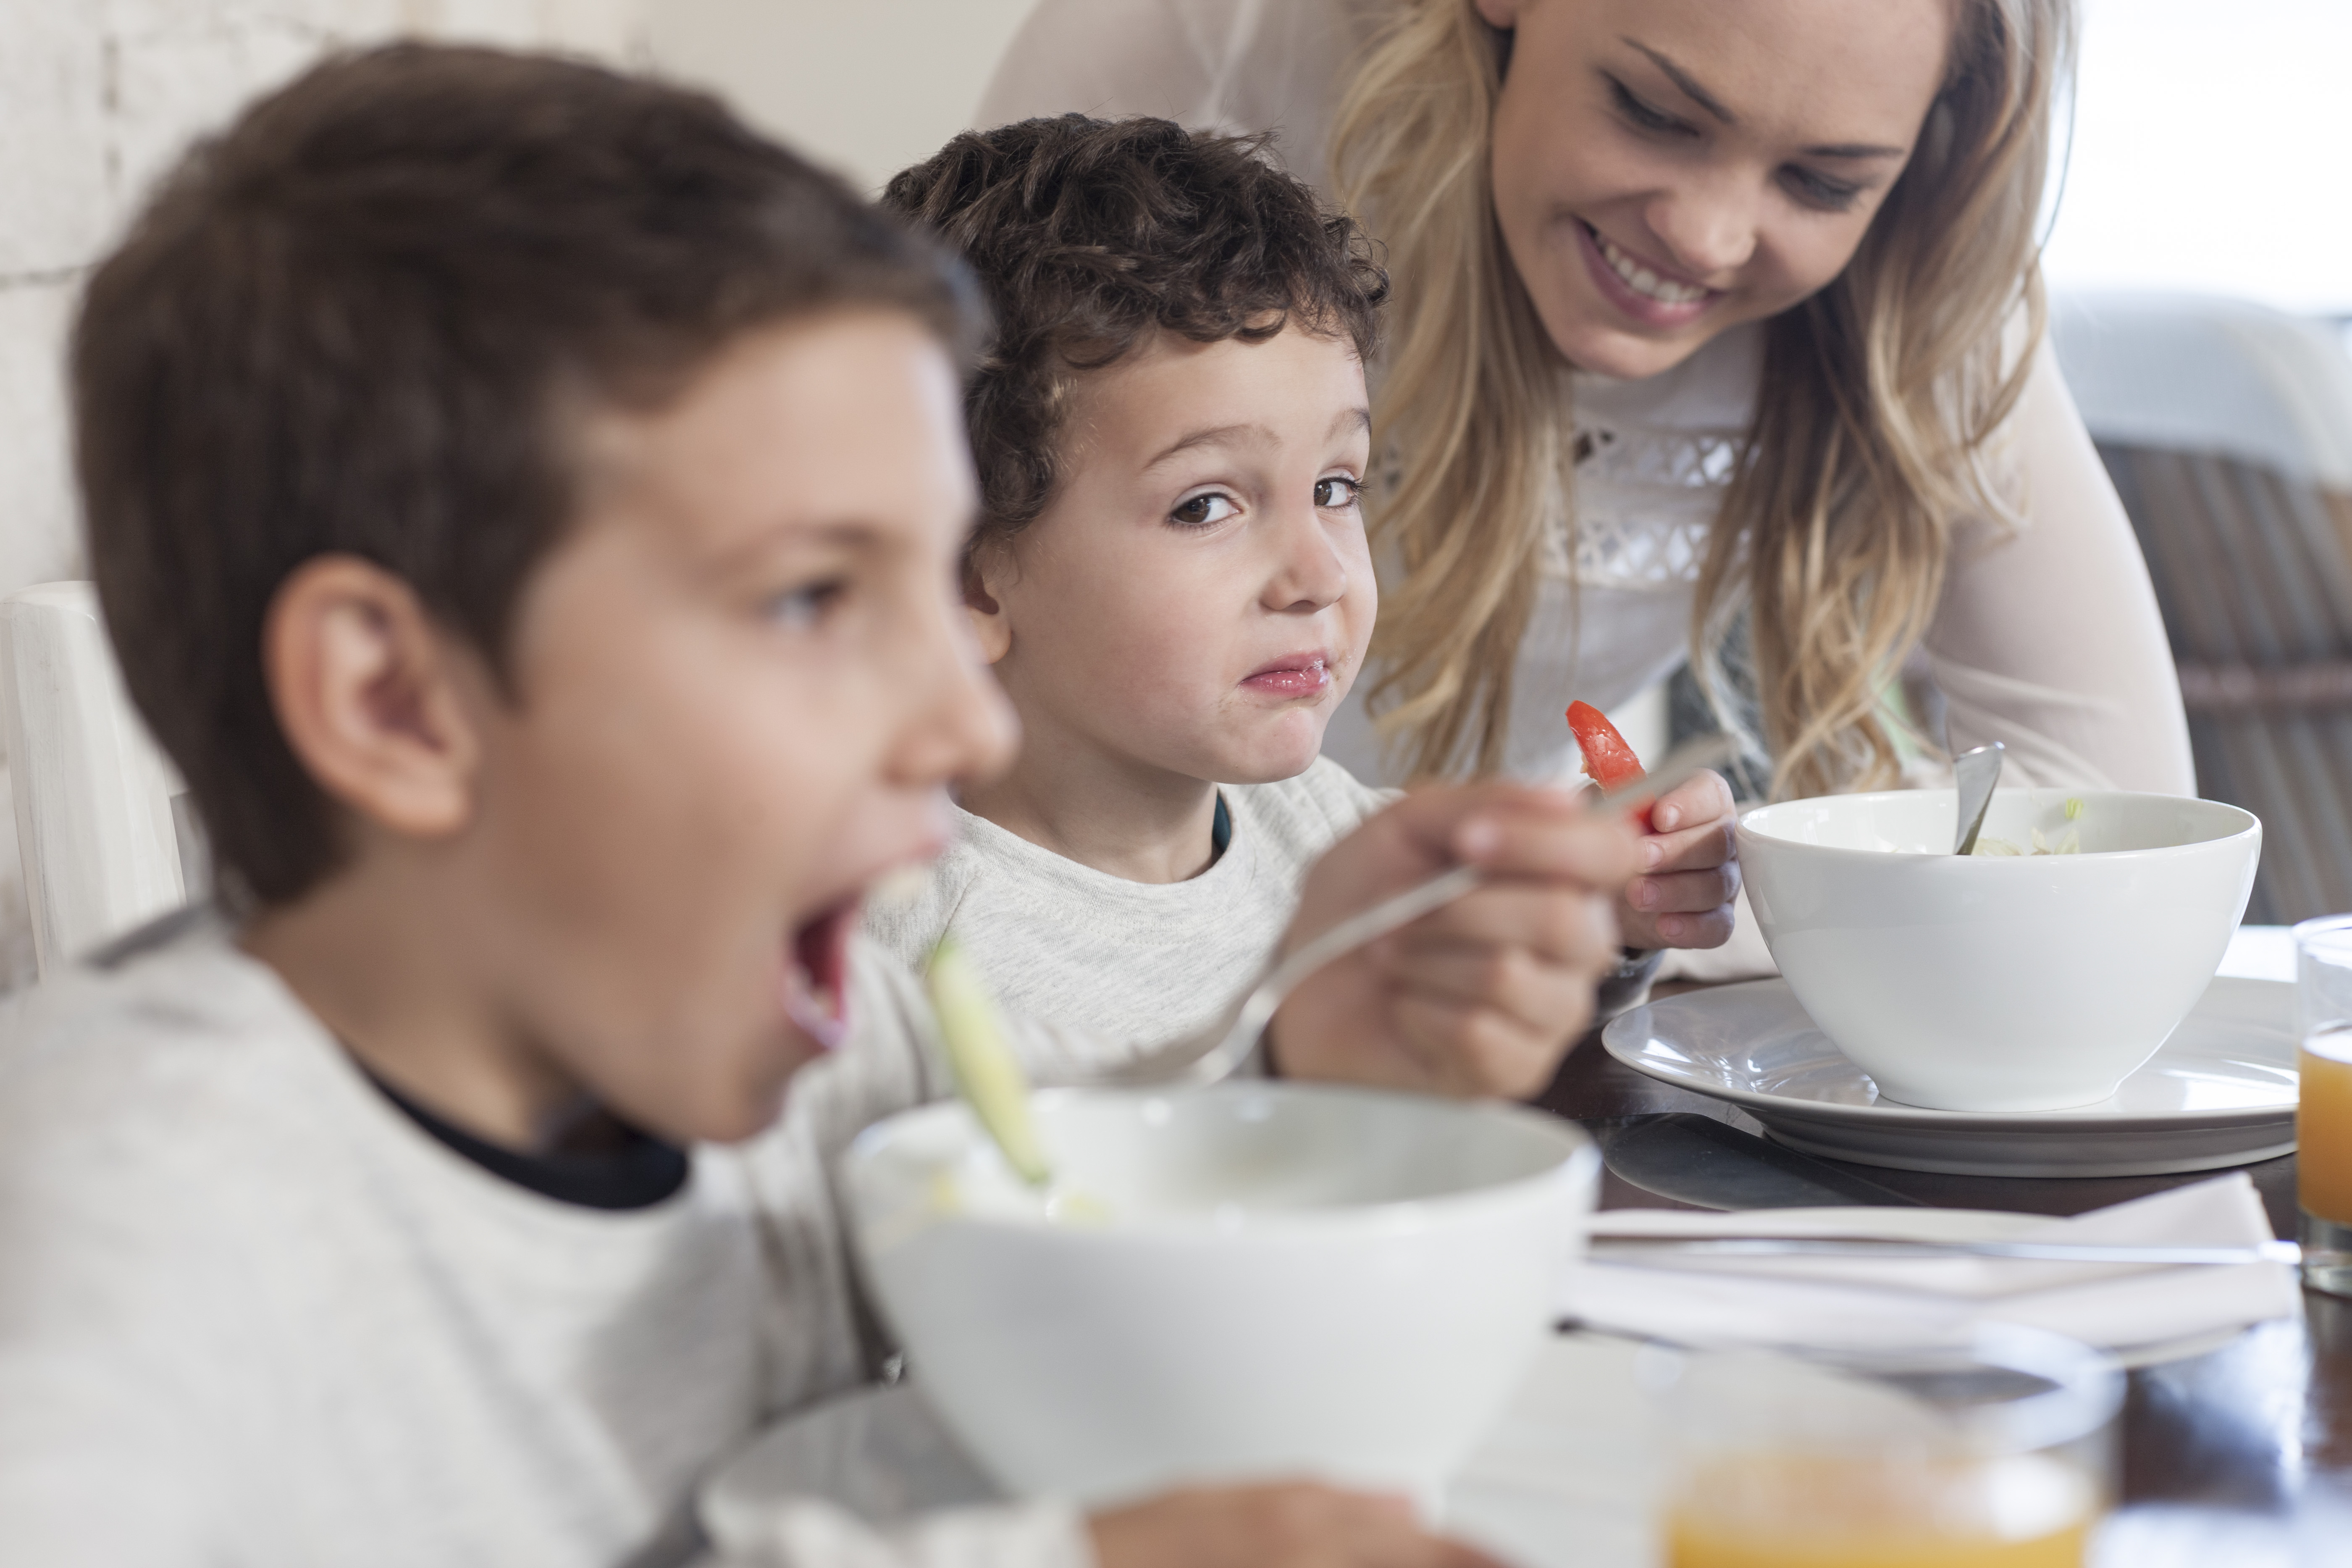 Boy with family having lunch in dining room refusing healthy food. Photo / Corbis [16FEBRUARY2016 FEATURES FAMILY LINES16]